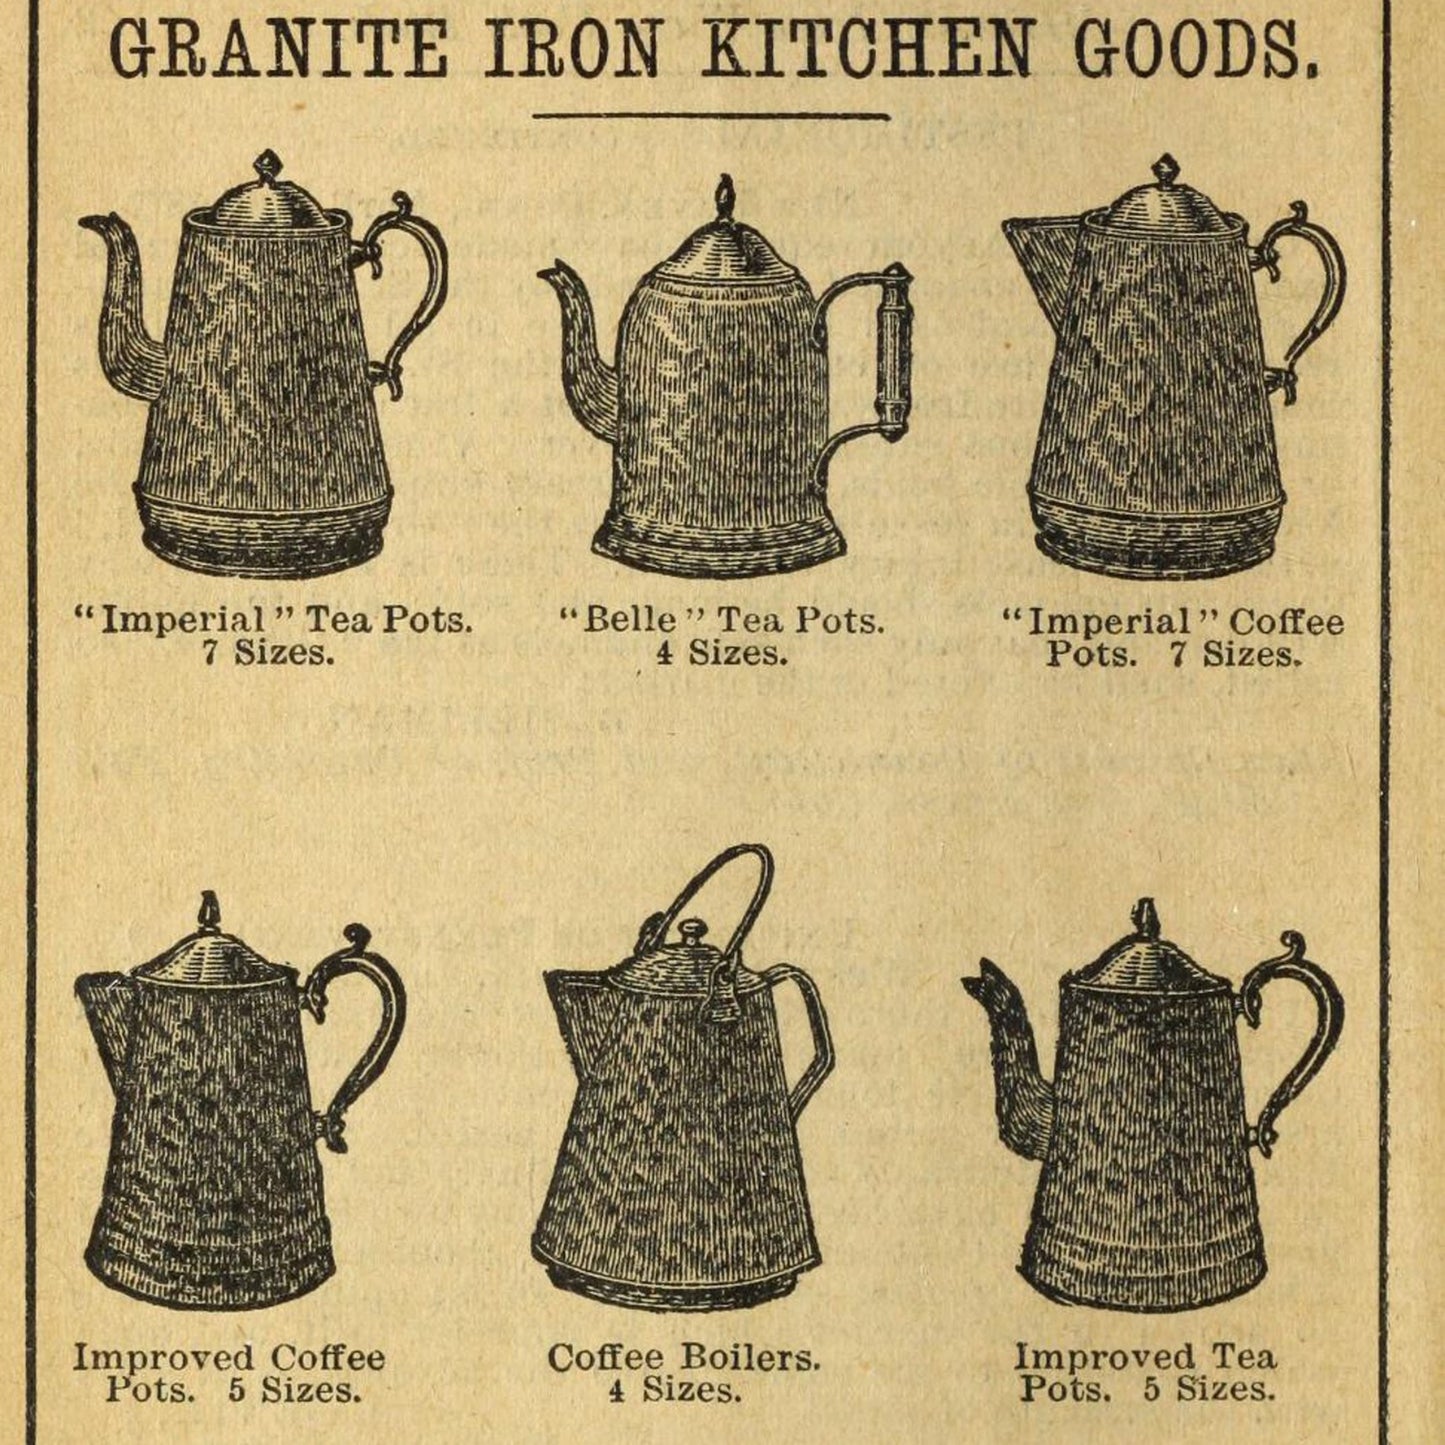 Granite Iron Ware Cook Book" published by the St. Louis Stamping Company